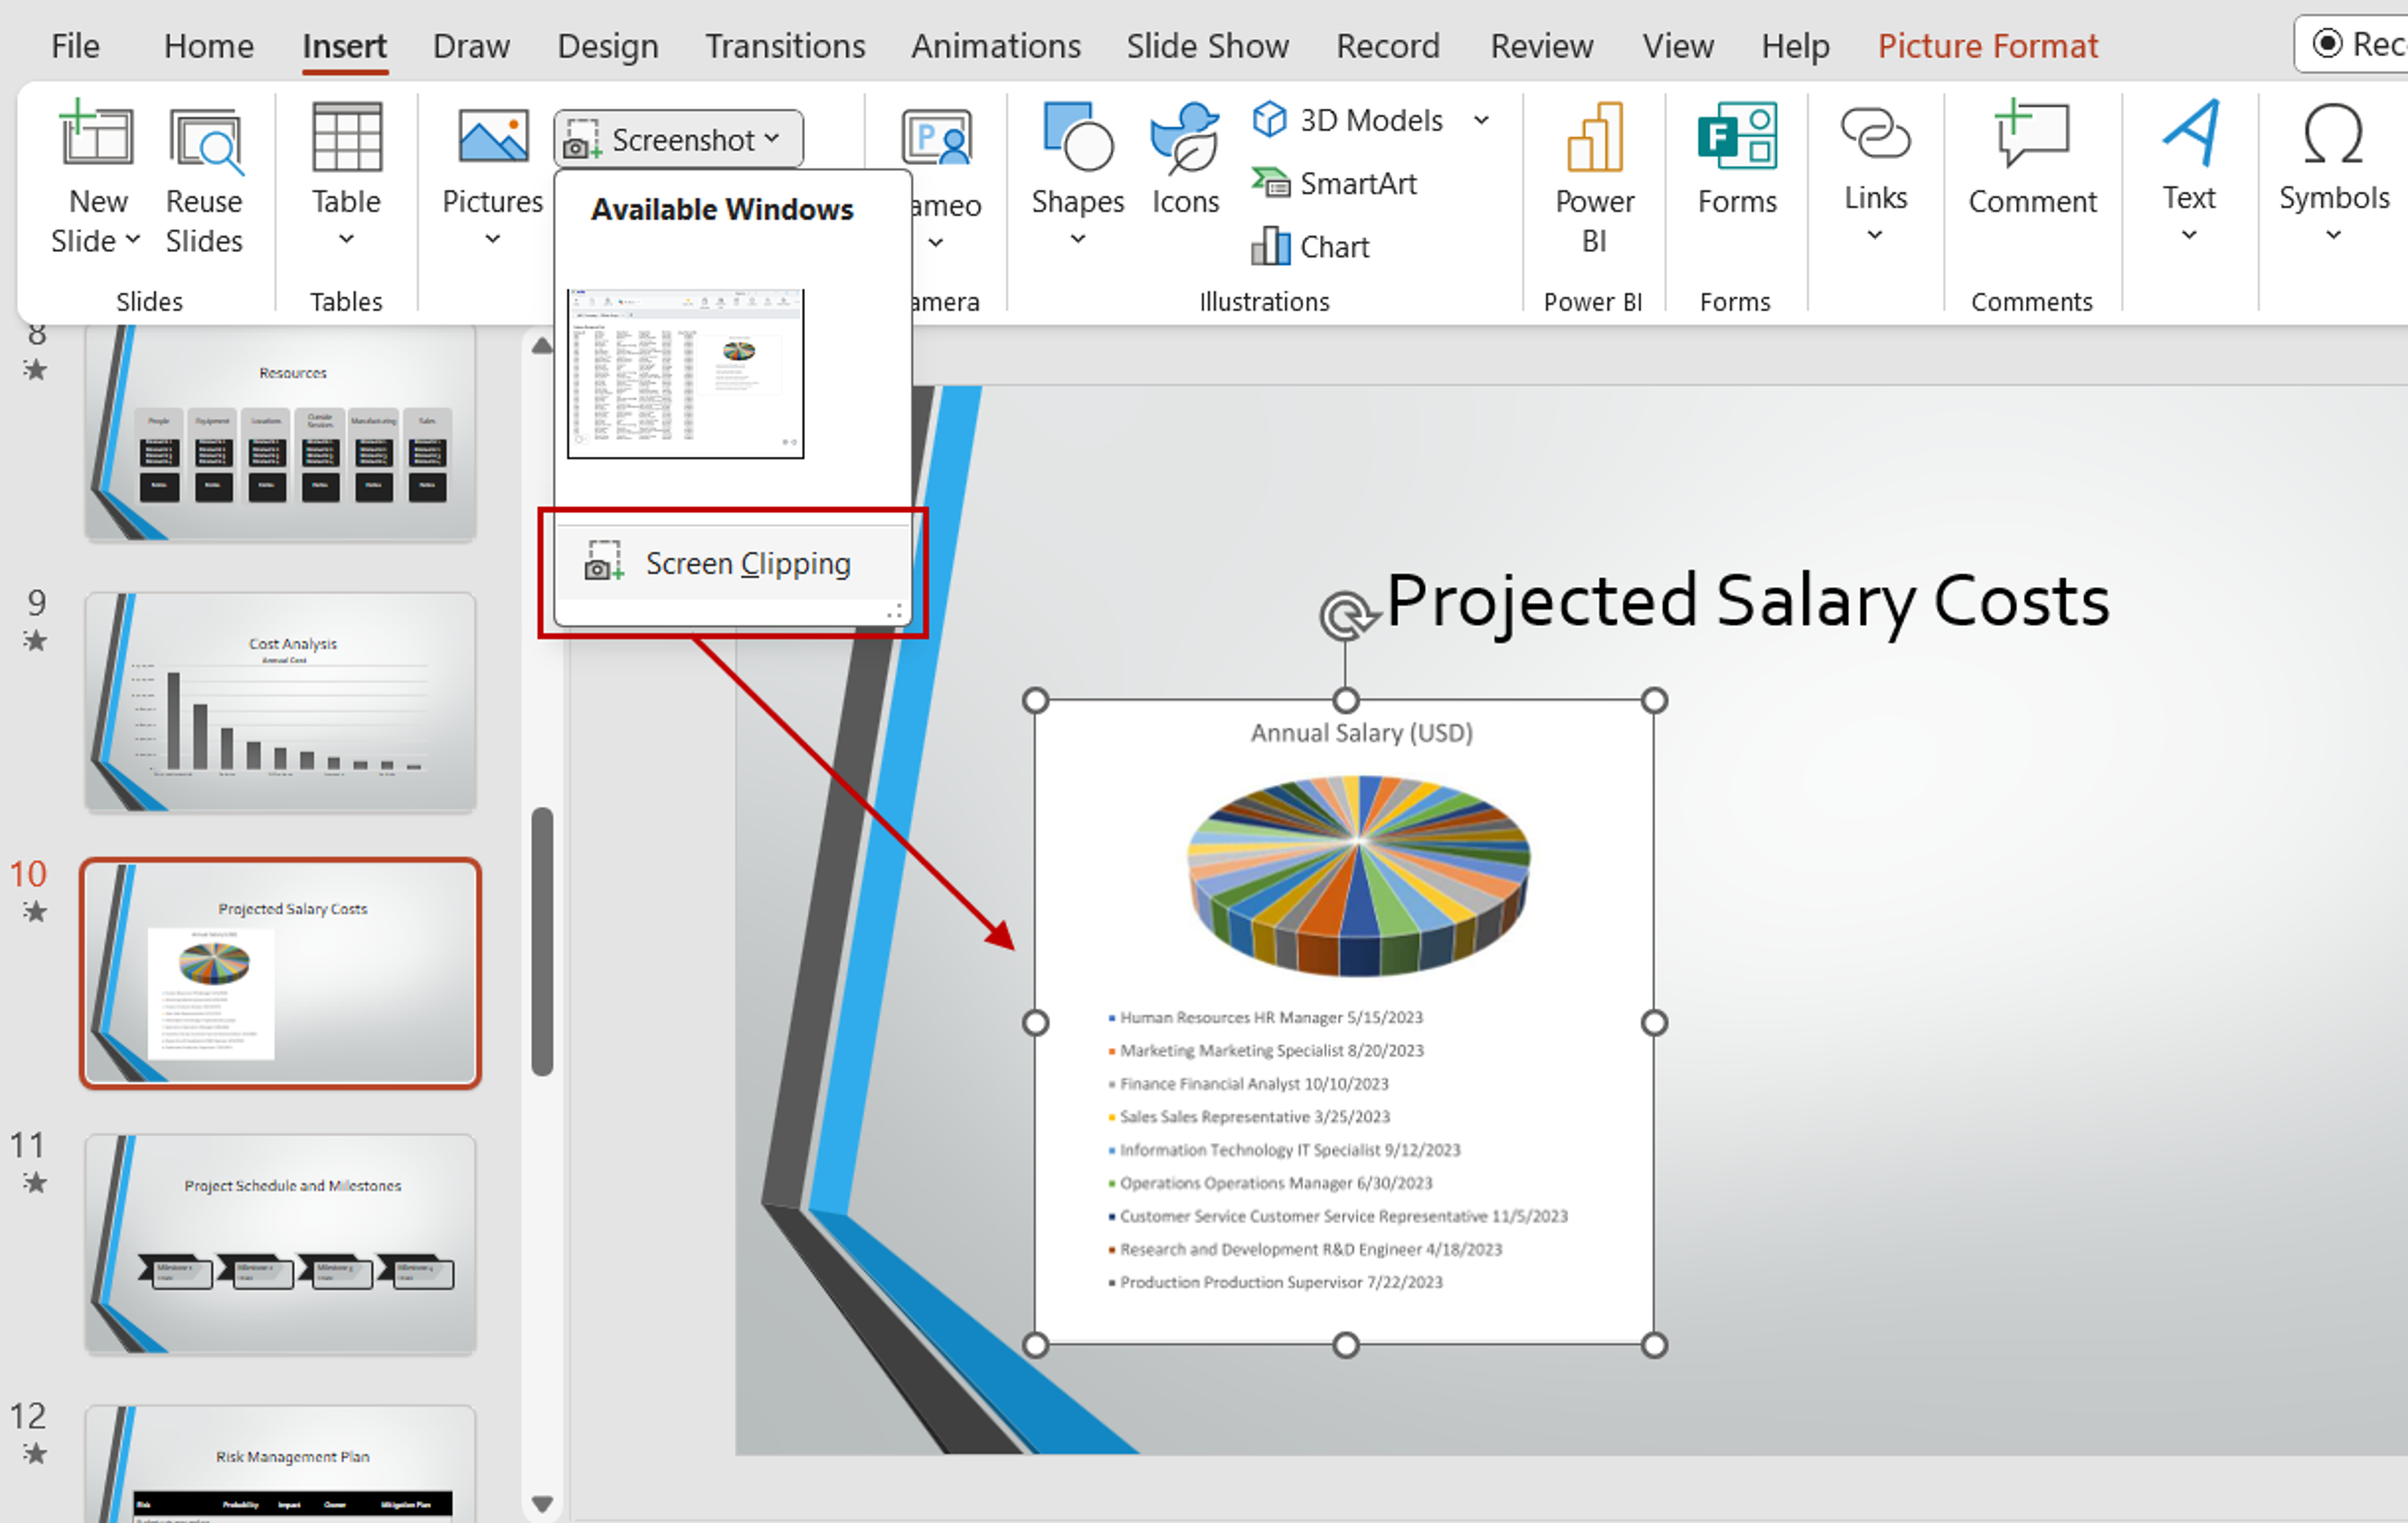 Insert a PDF image into PowerPoint